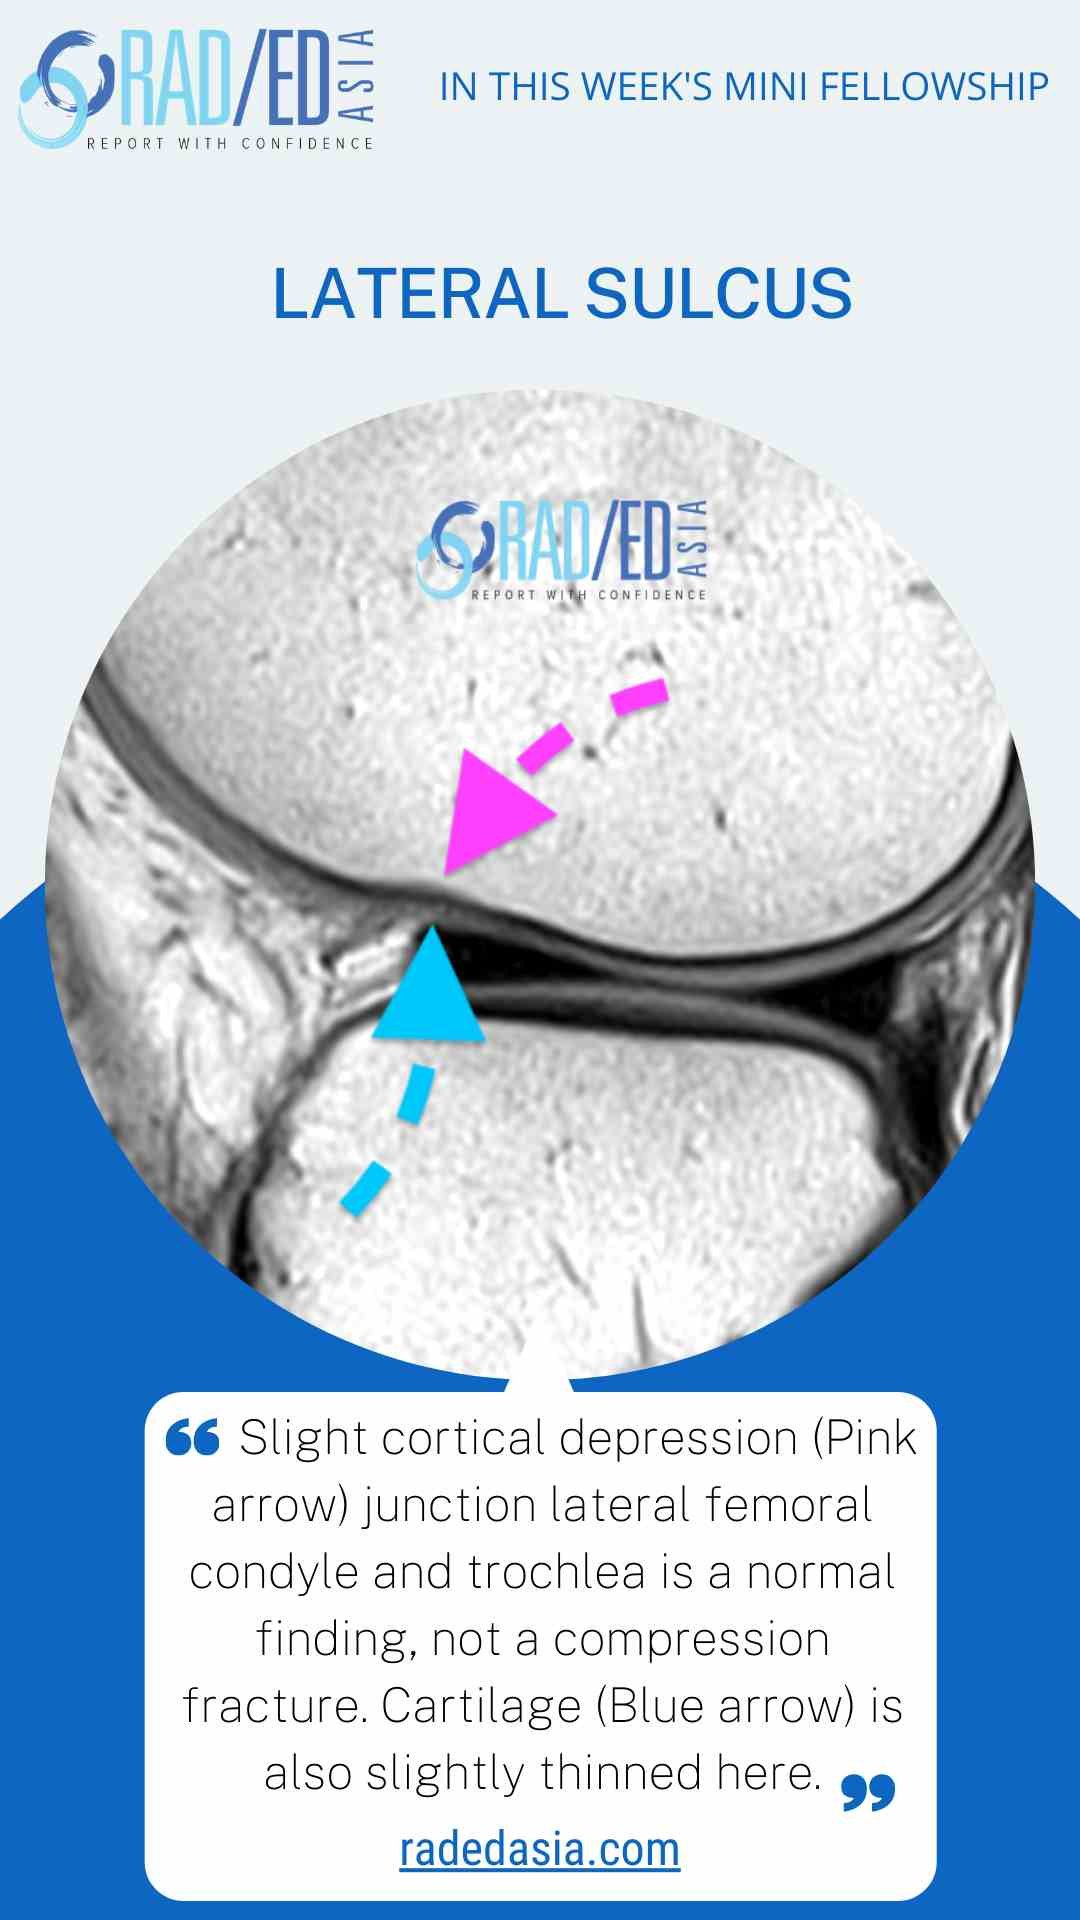 lateral sulcus knee mri acc tear osteochondral fracture radedasia